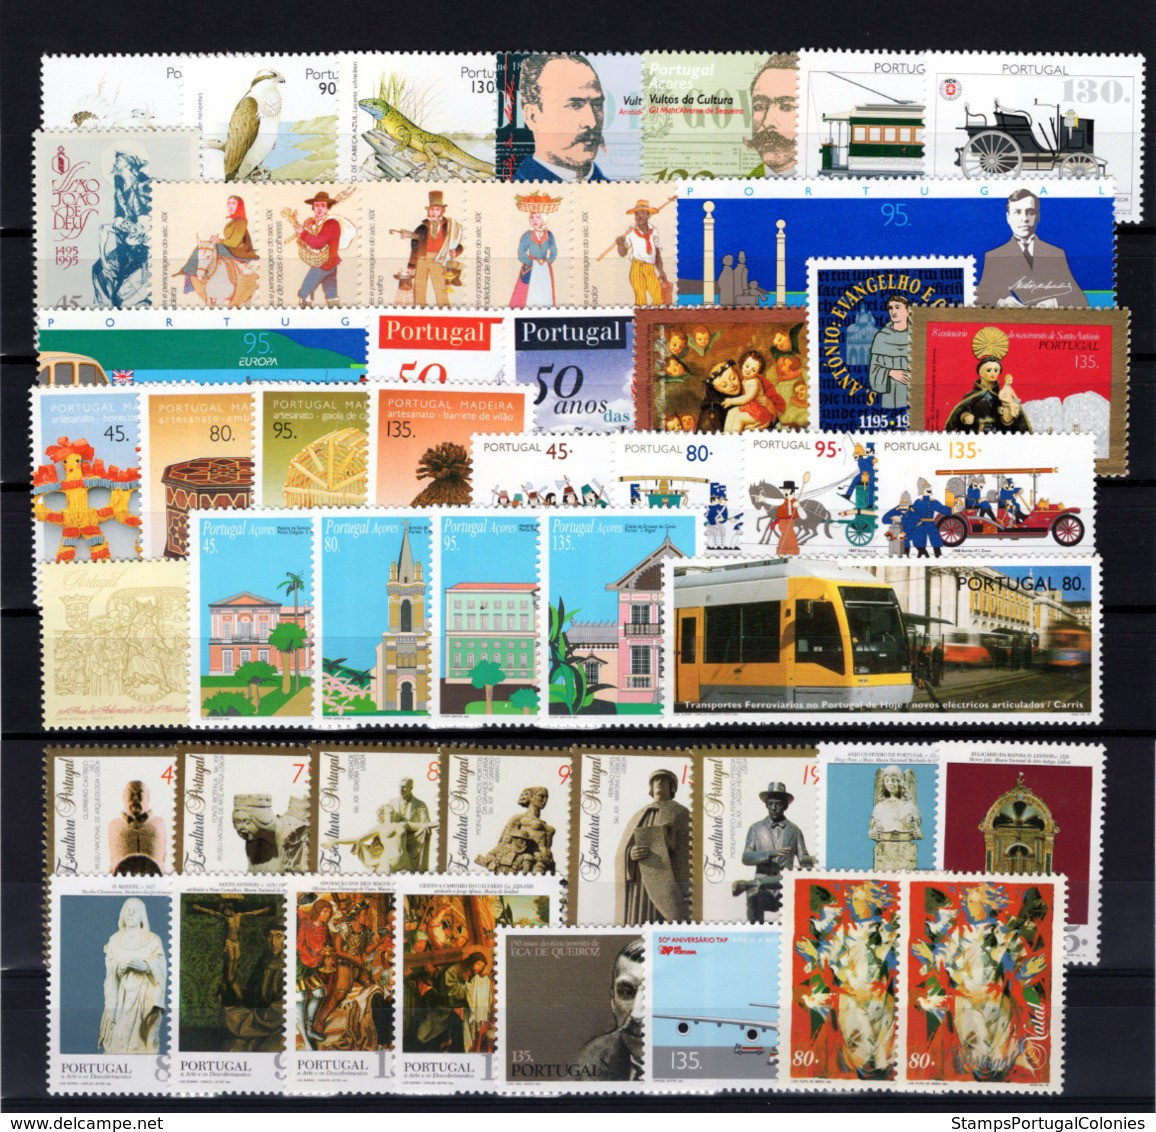 1995 Portugal Azores Madeira Complete Year MNH Stamps. Année Compléte NeufSansCharnière. Ano Completo Novo Sem Charneira - Annate Complete